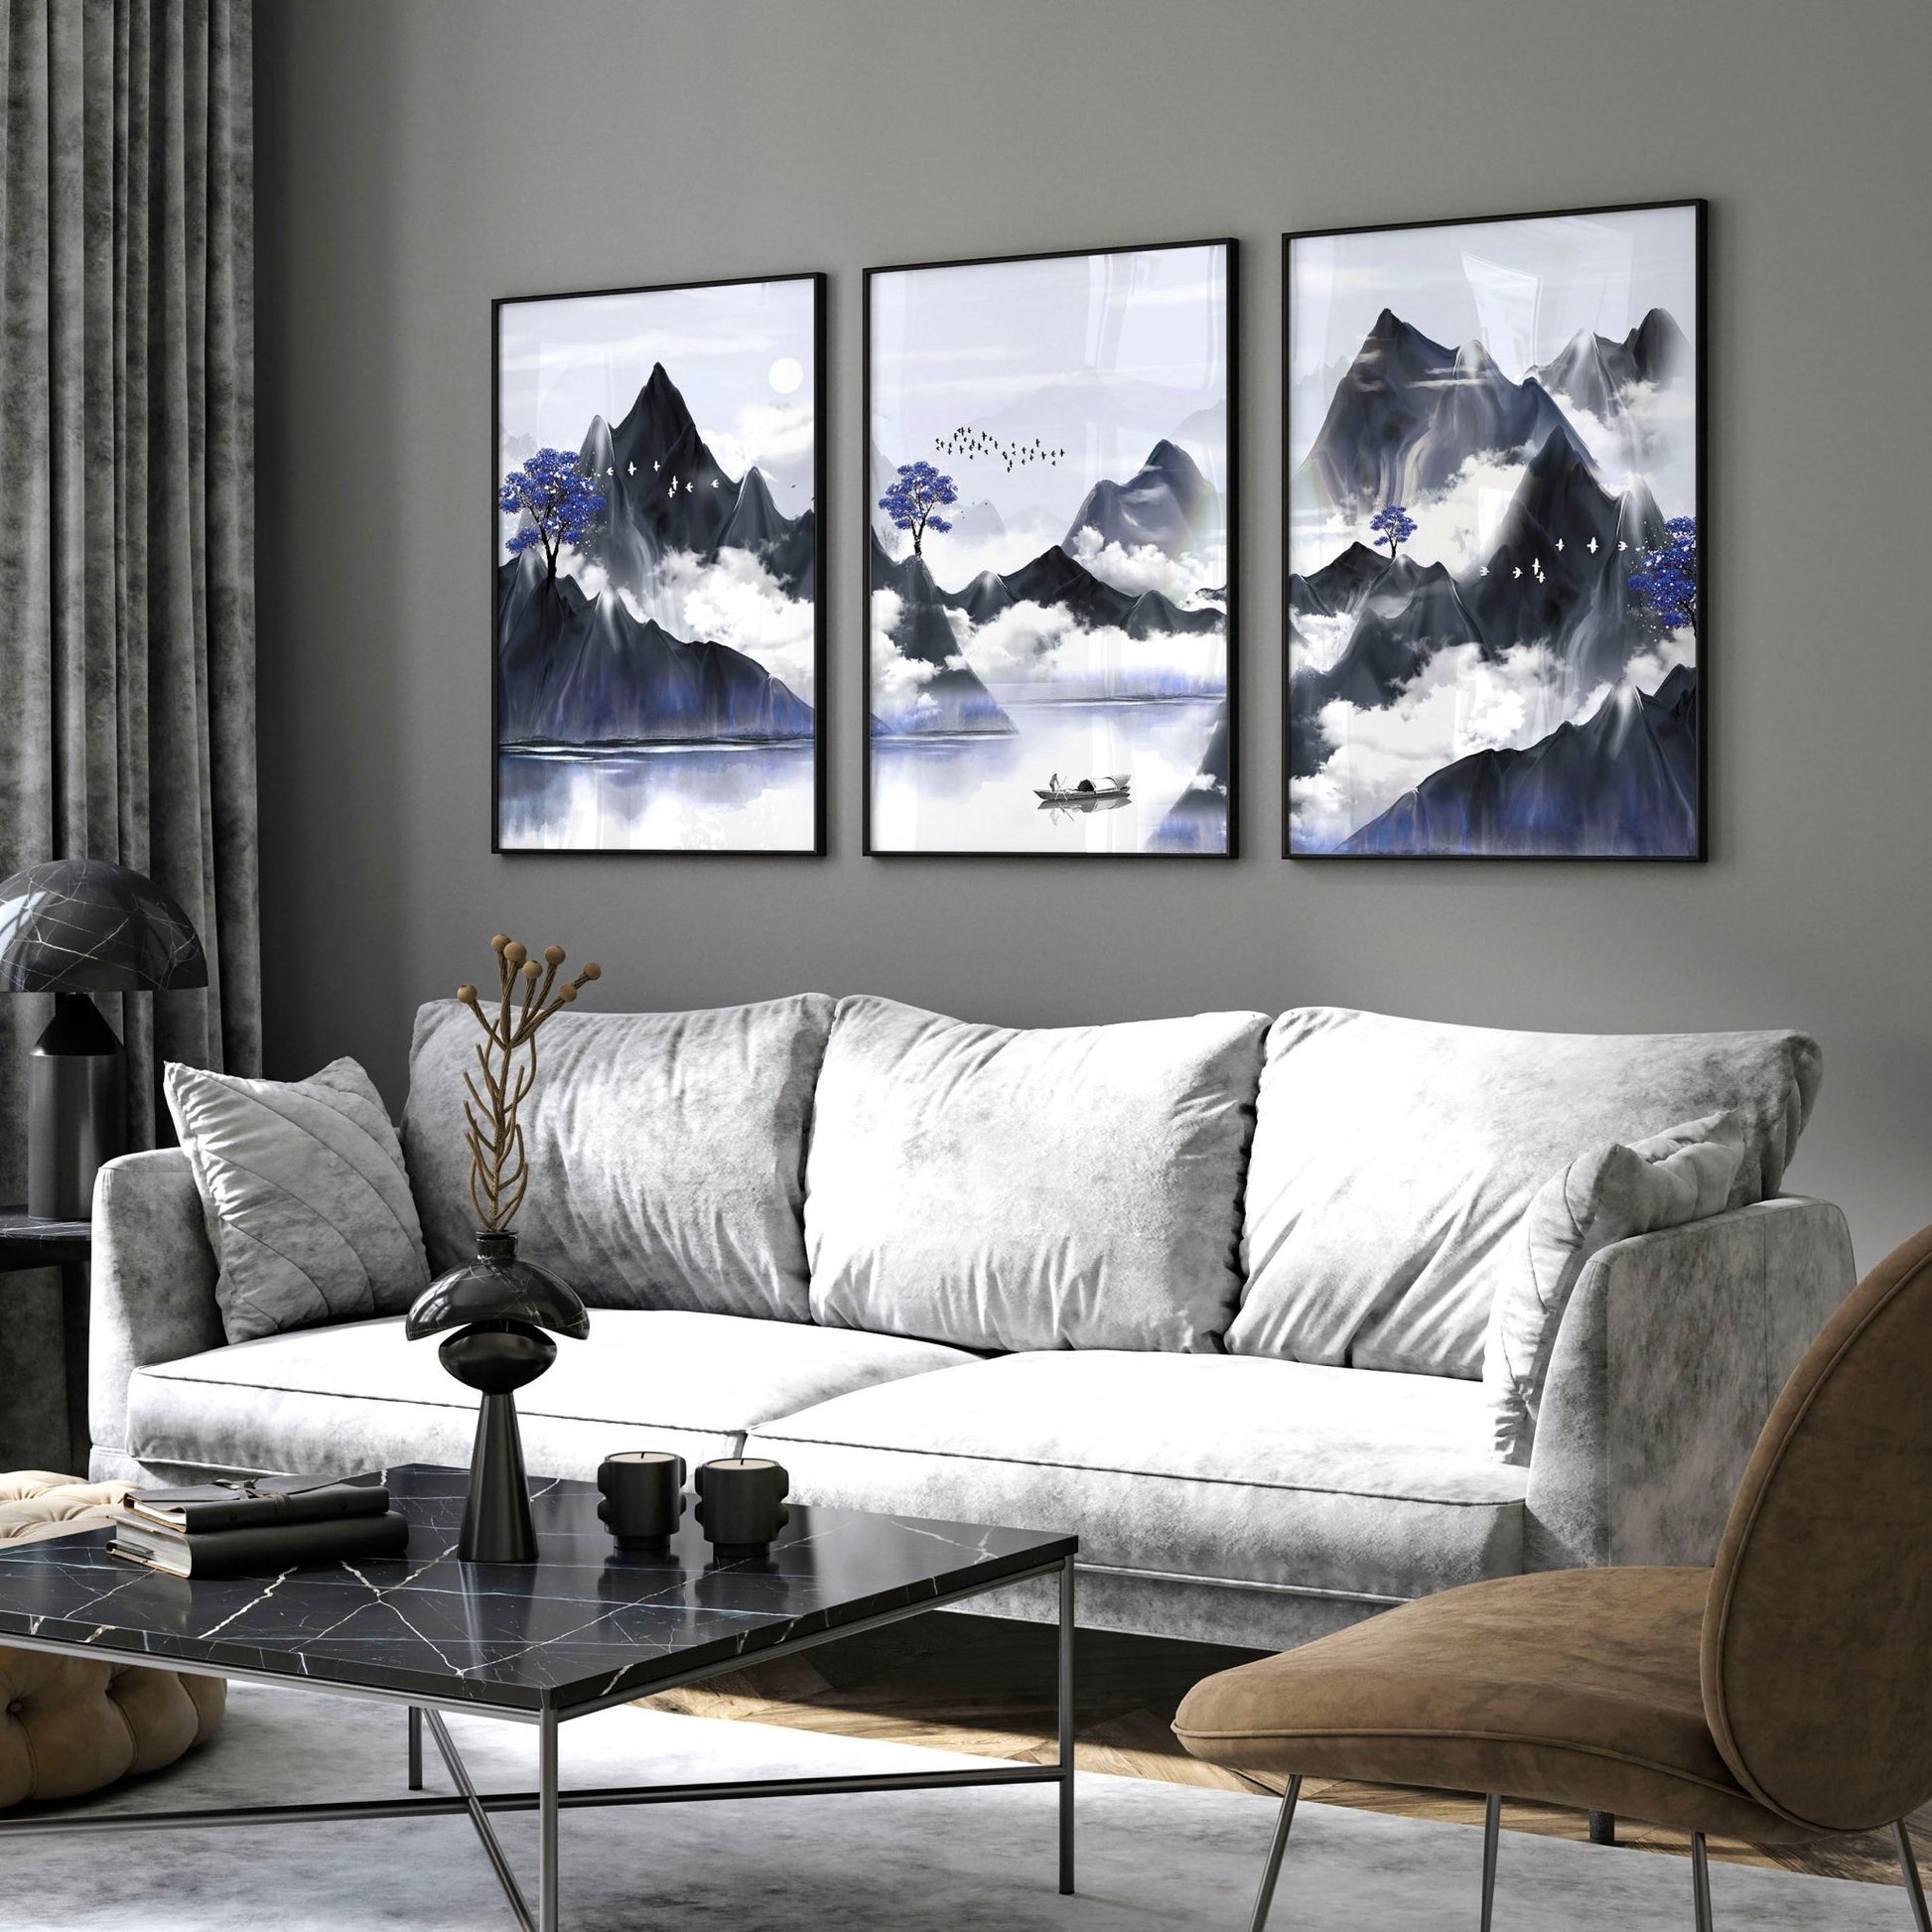 Japanese living room pictures for wall | set of 3 art prints - About Wall Art